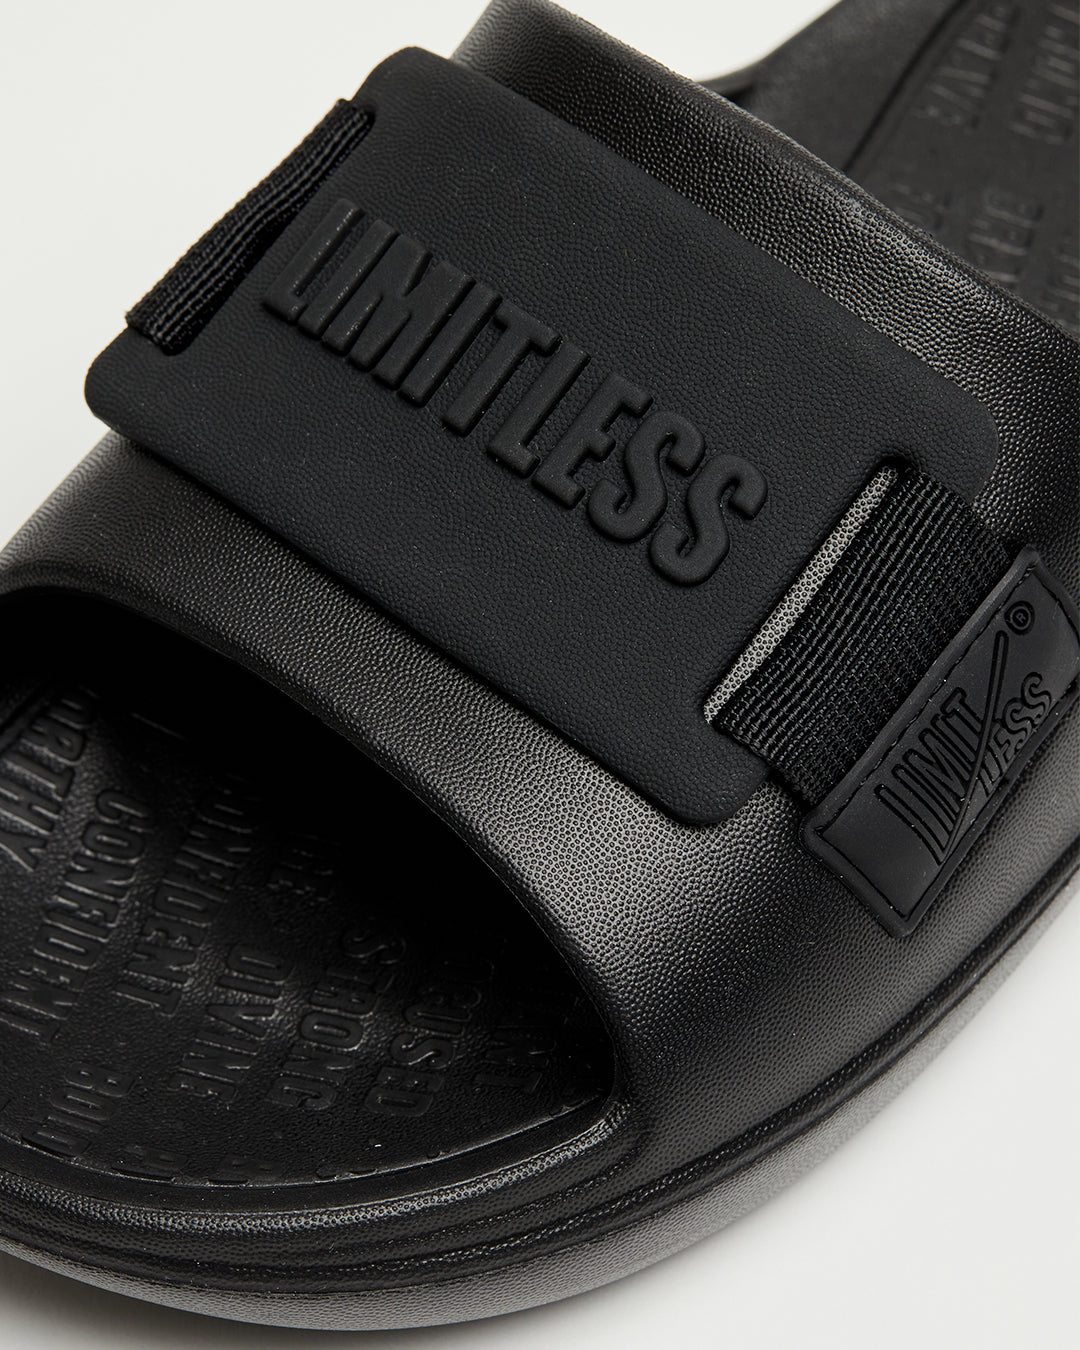 LIMITLESS SLIDES™ WITH ESSENTIAL TIBAH™ QUAD - ST. AUGUSTINE HIGH SCHOOL EDITION